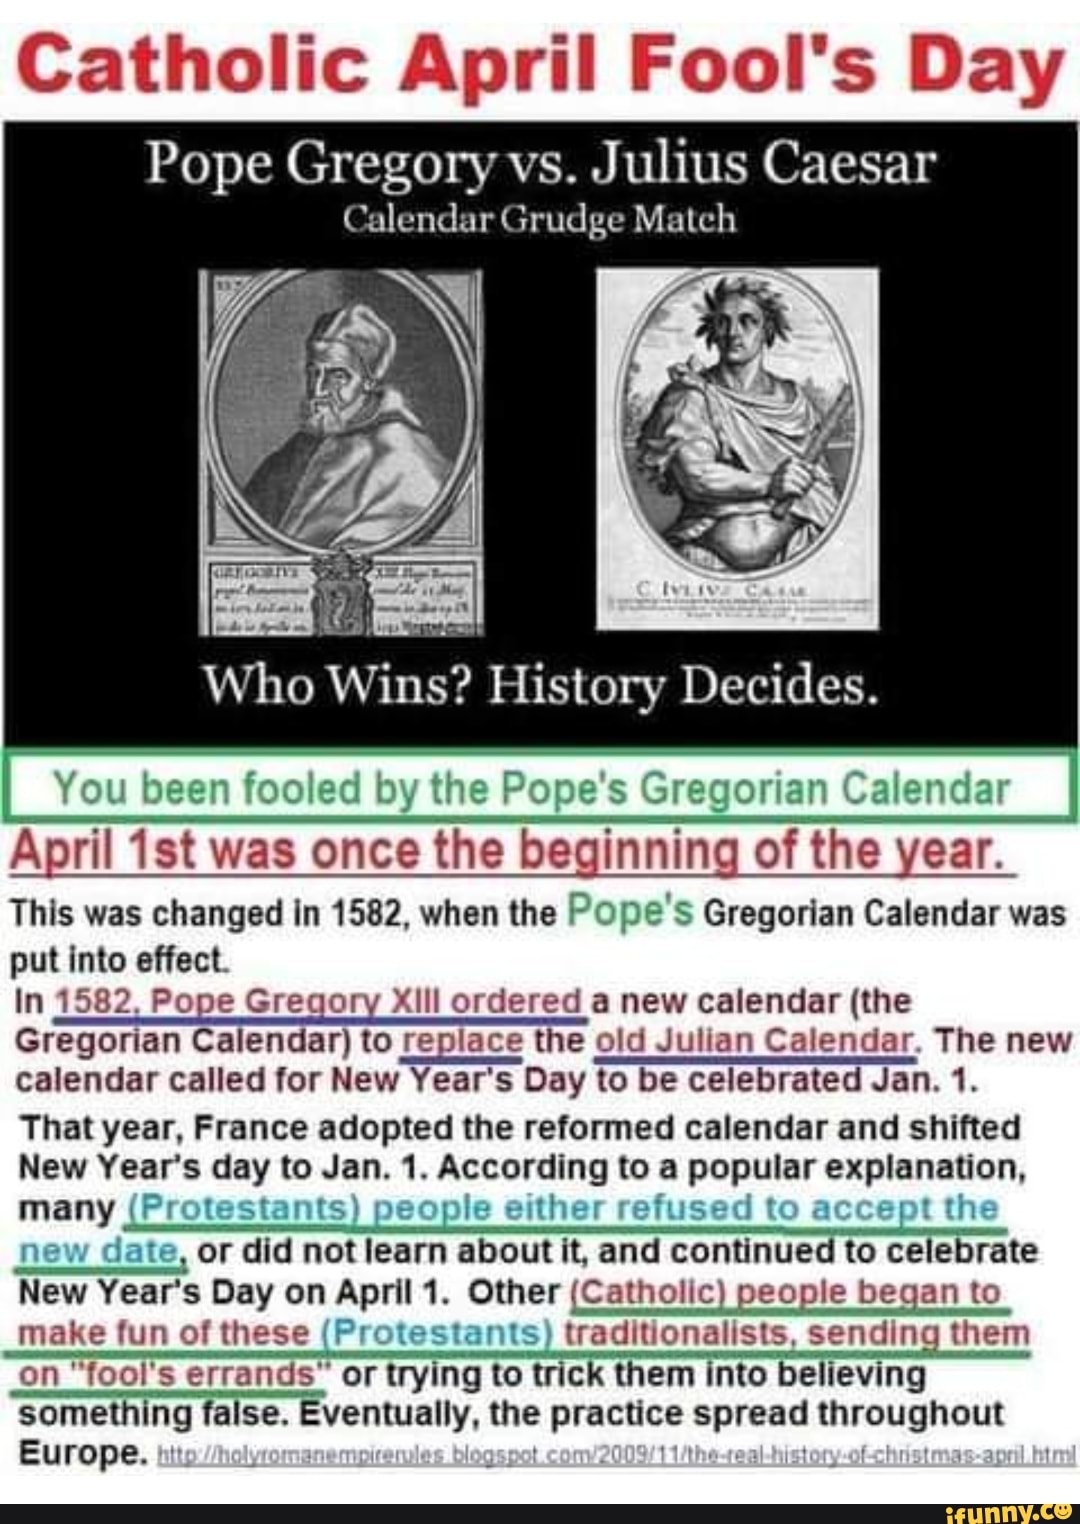 Whats the difference between julian and gregorian calendar?